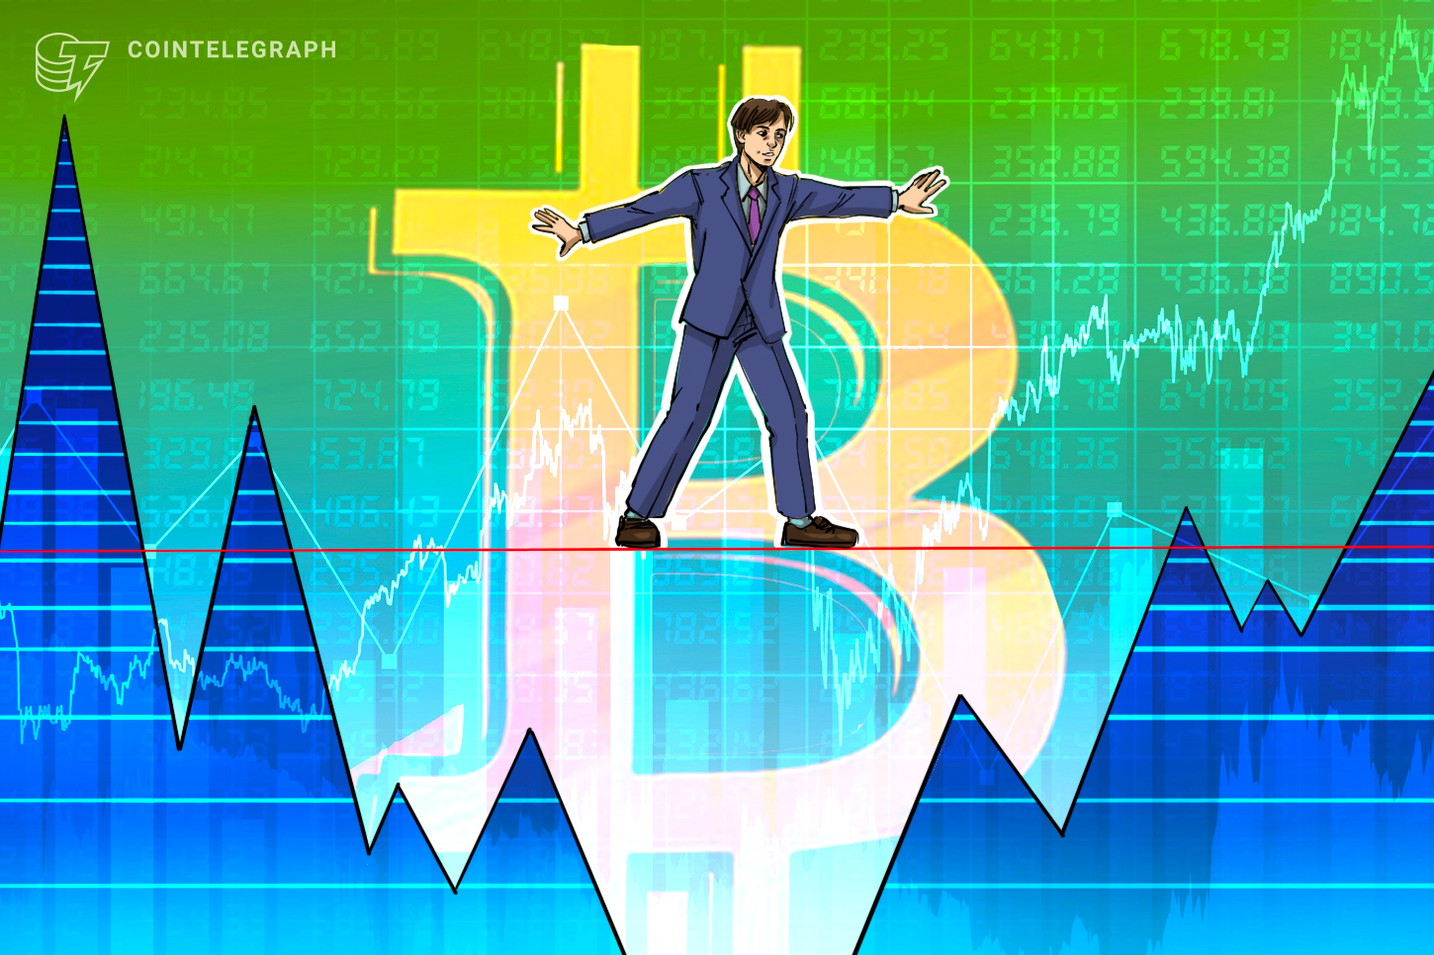 Bitcoin price reaches 3-month high near $31K, prompting crypto traders to advise caution